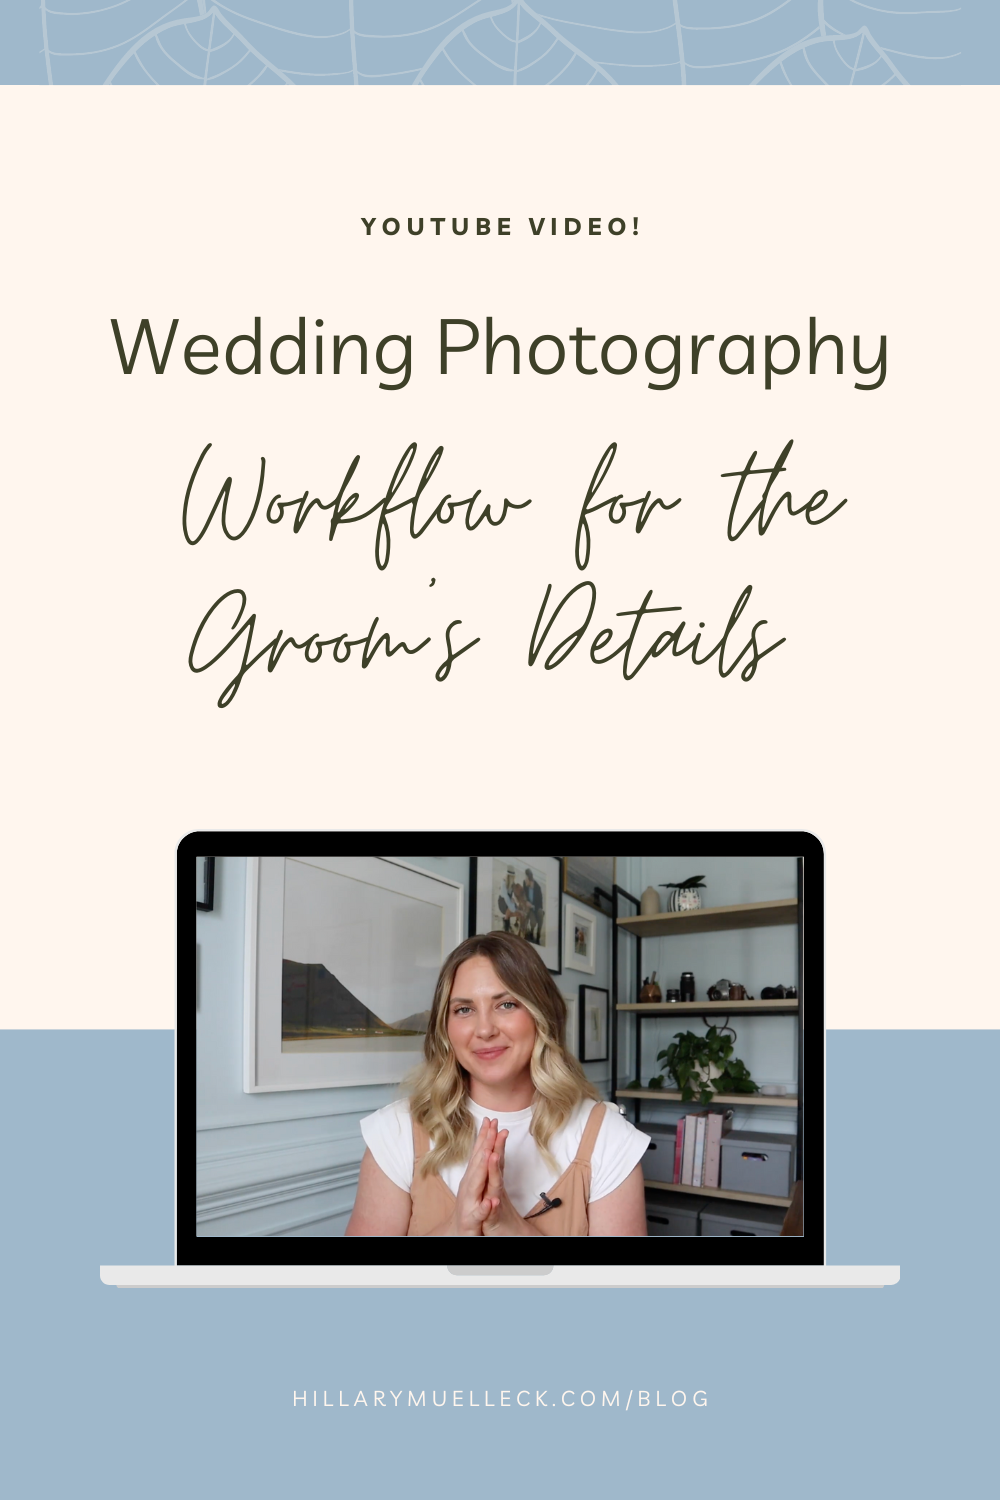 Wedding photographer Hillary Muelleck shares her photography workflow for photographing the groom and his details on a wedding morning